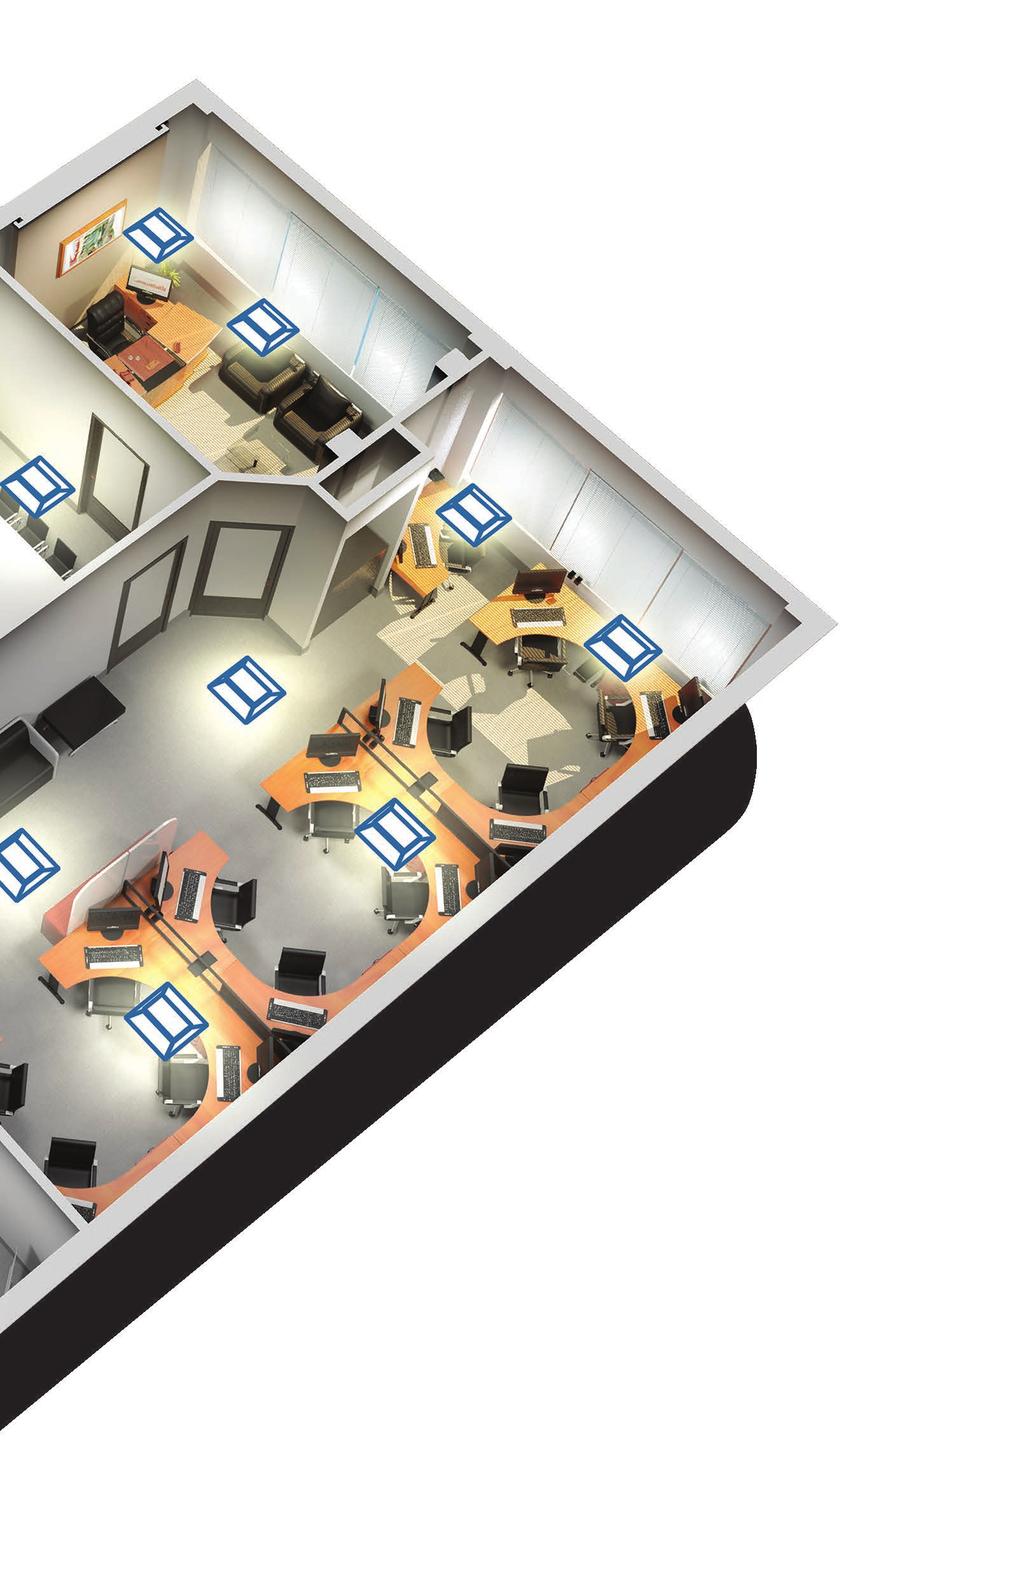 Indoor CREE TECHNOLOGY VALUE BEYOND LIGHTING SmartCast Technology creates secure lighting networks that connect